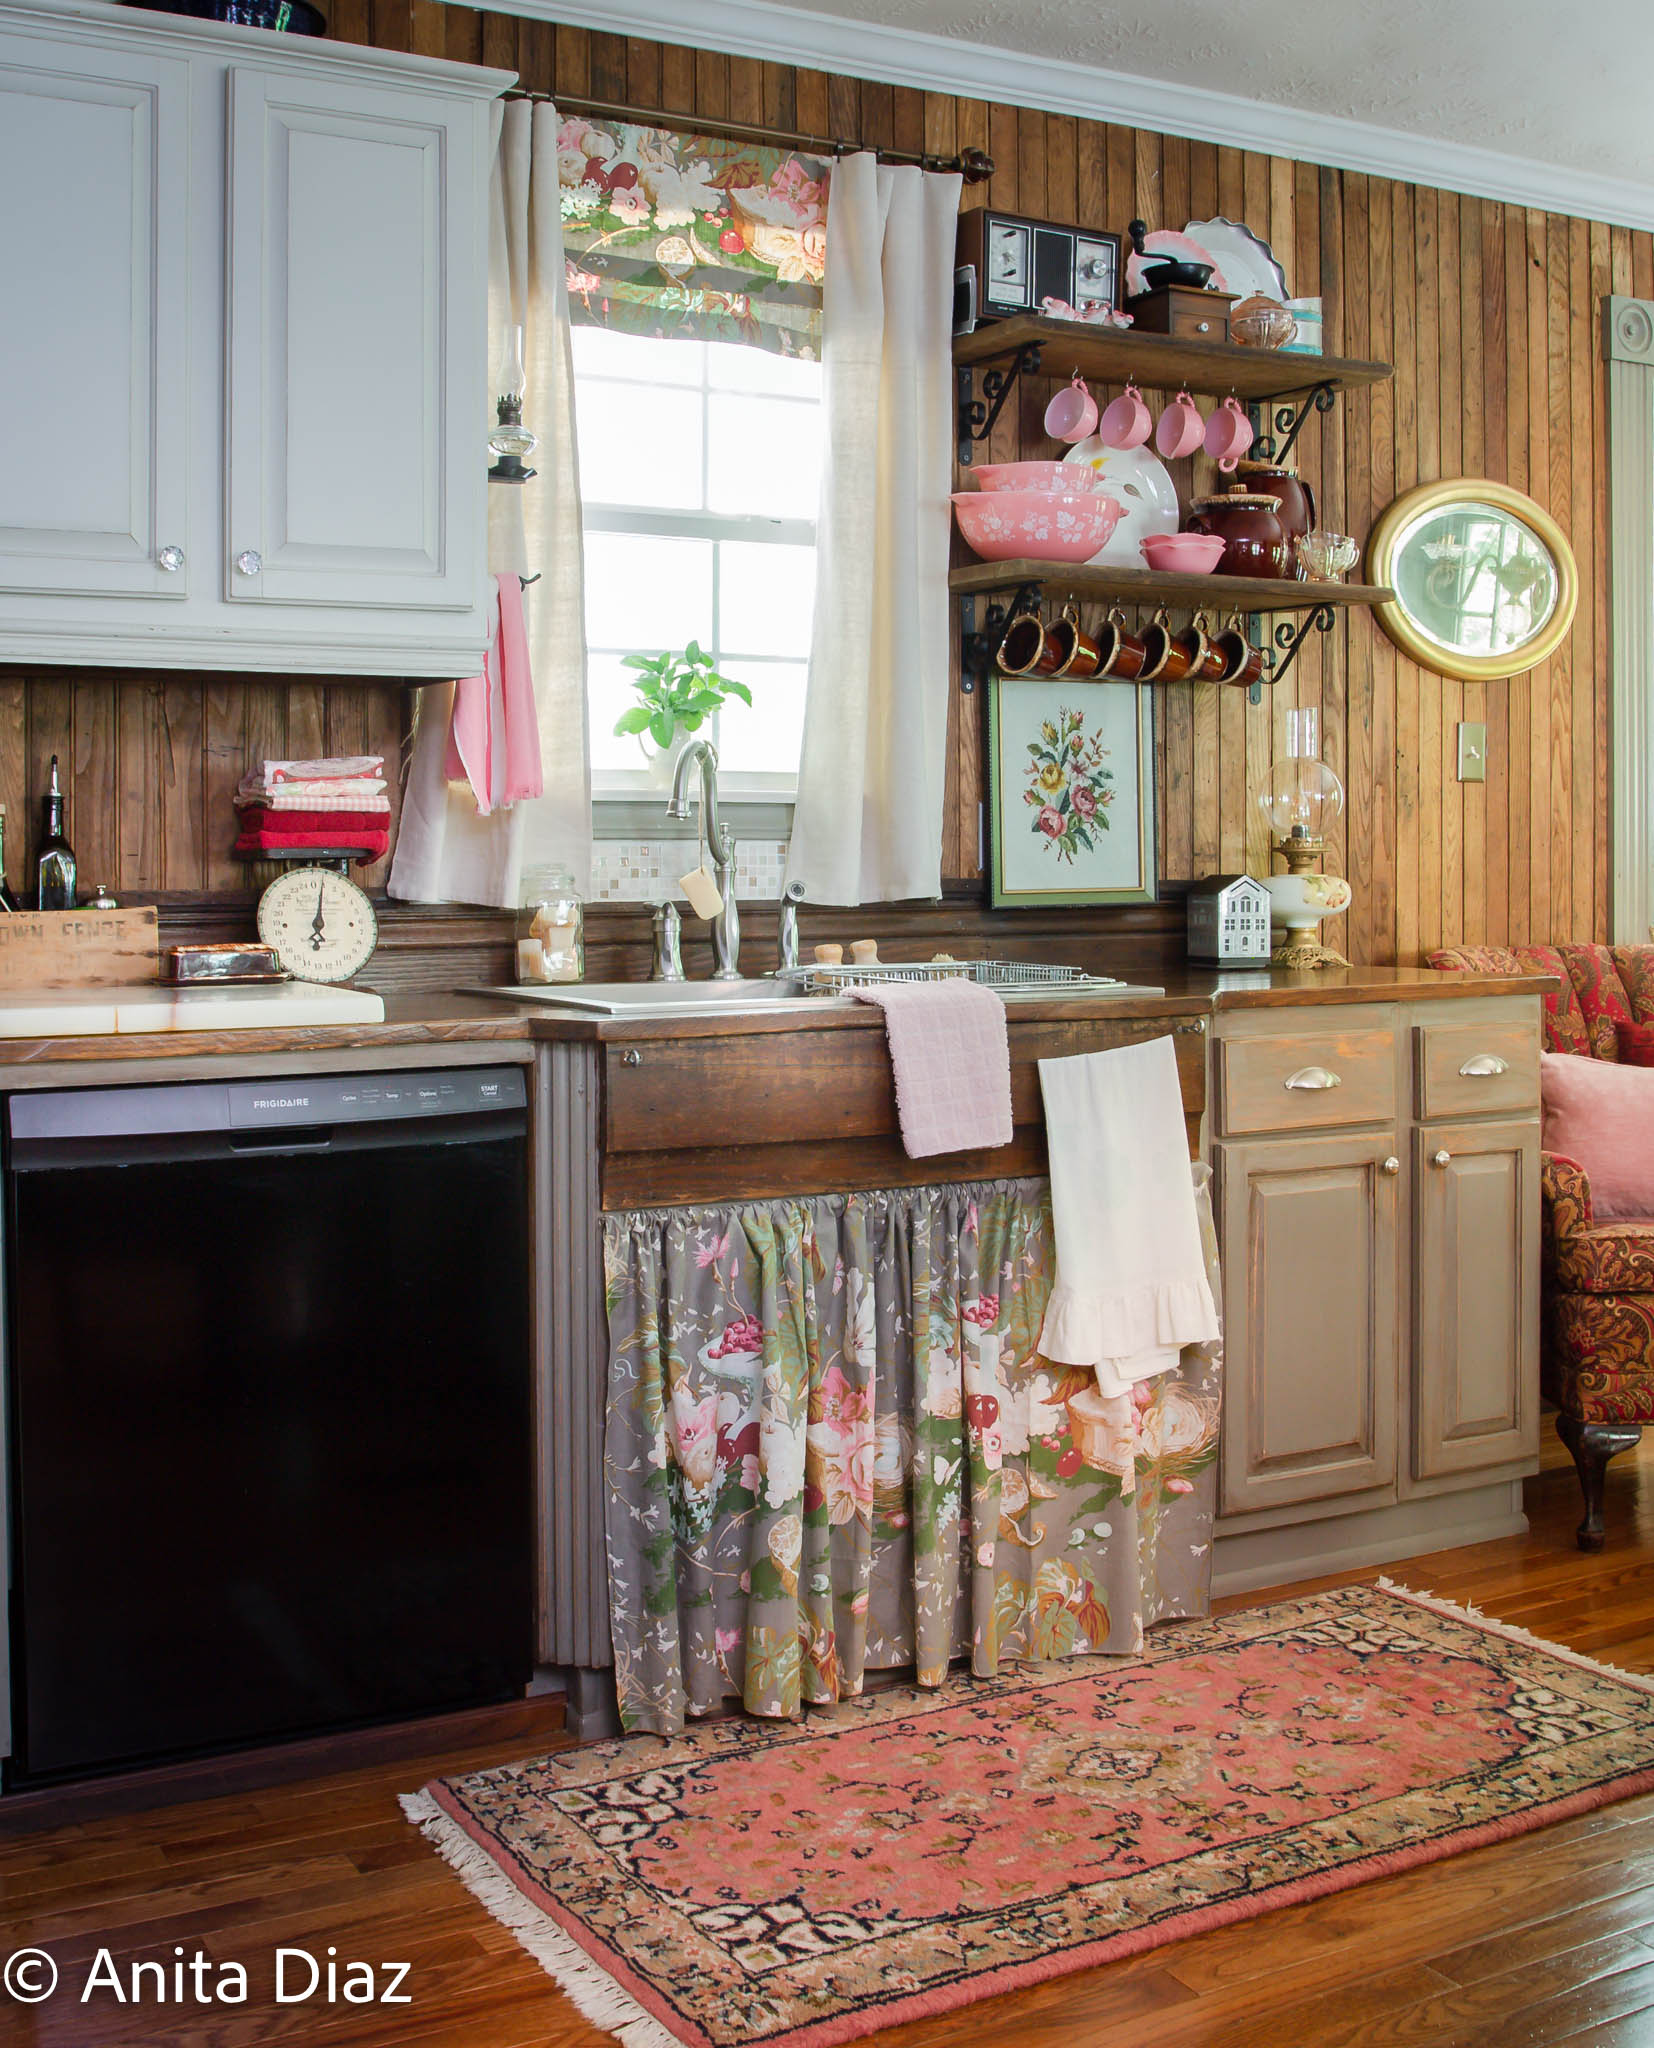 Decorating the summer kitchen - Whispering Pines Homestead